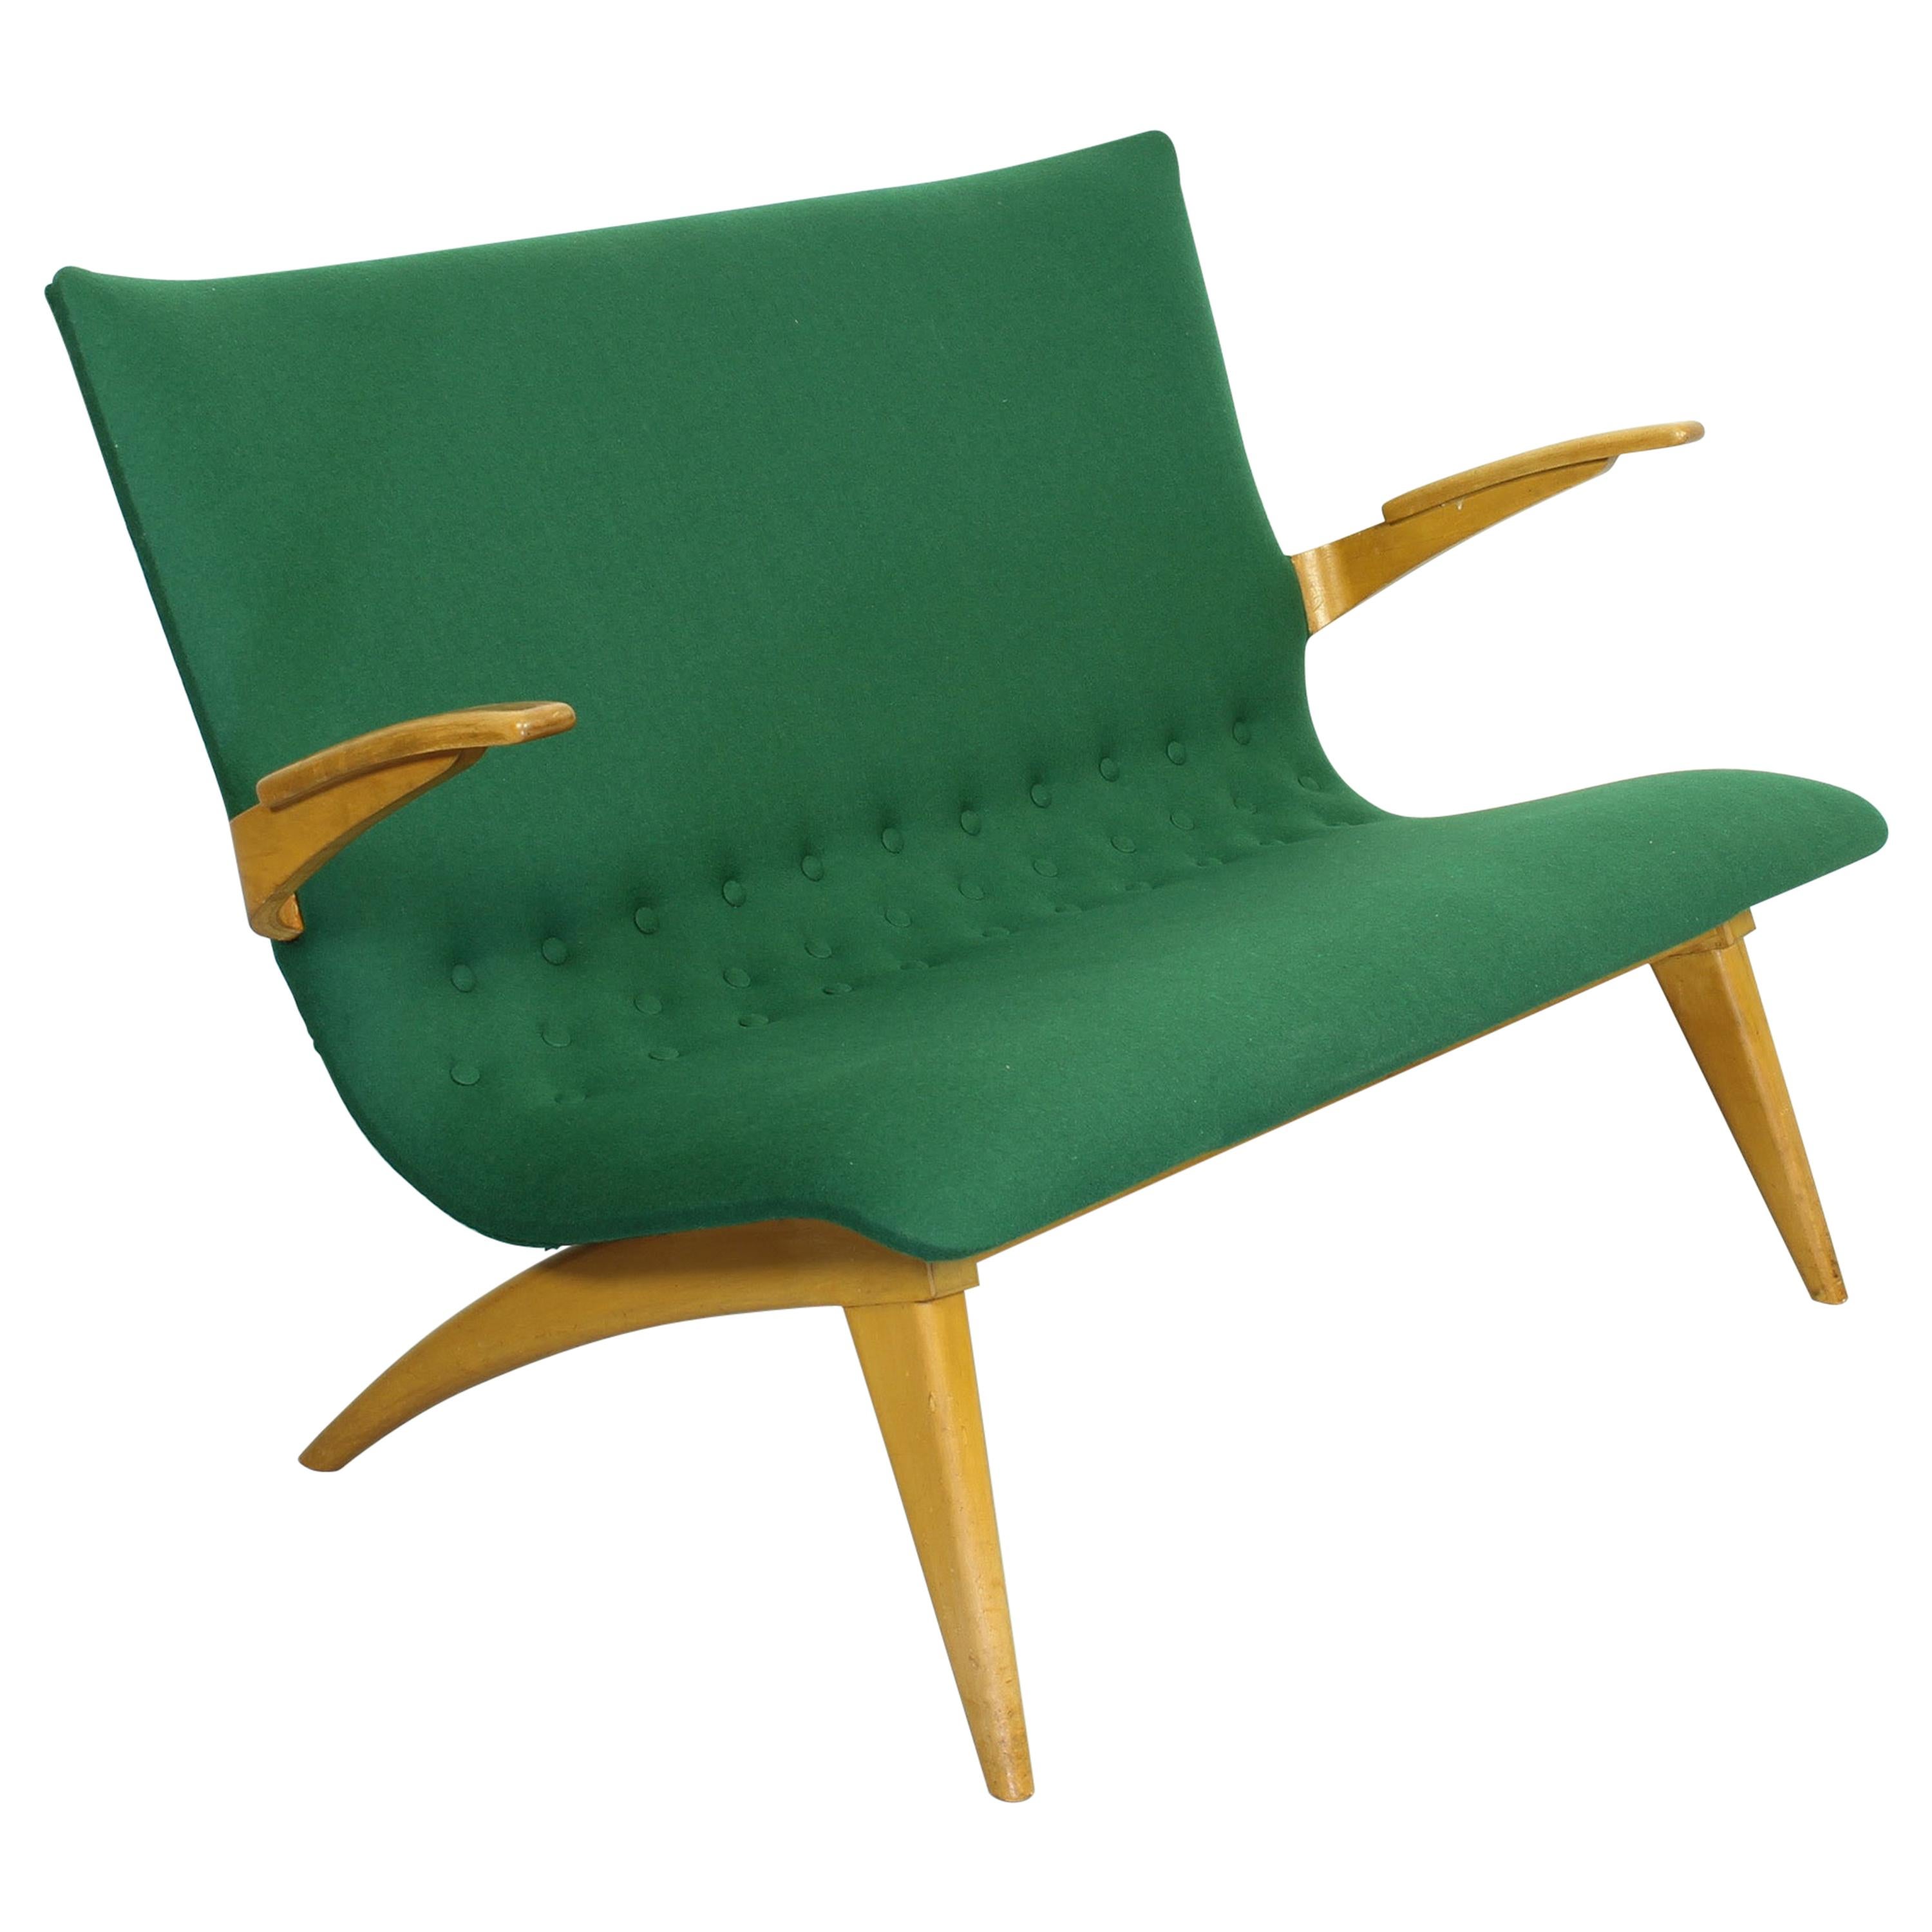 Sofa by G. van Os for Van Os Culemborg, 1950s For Sale